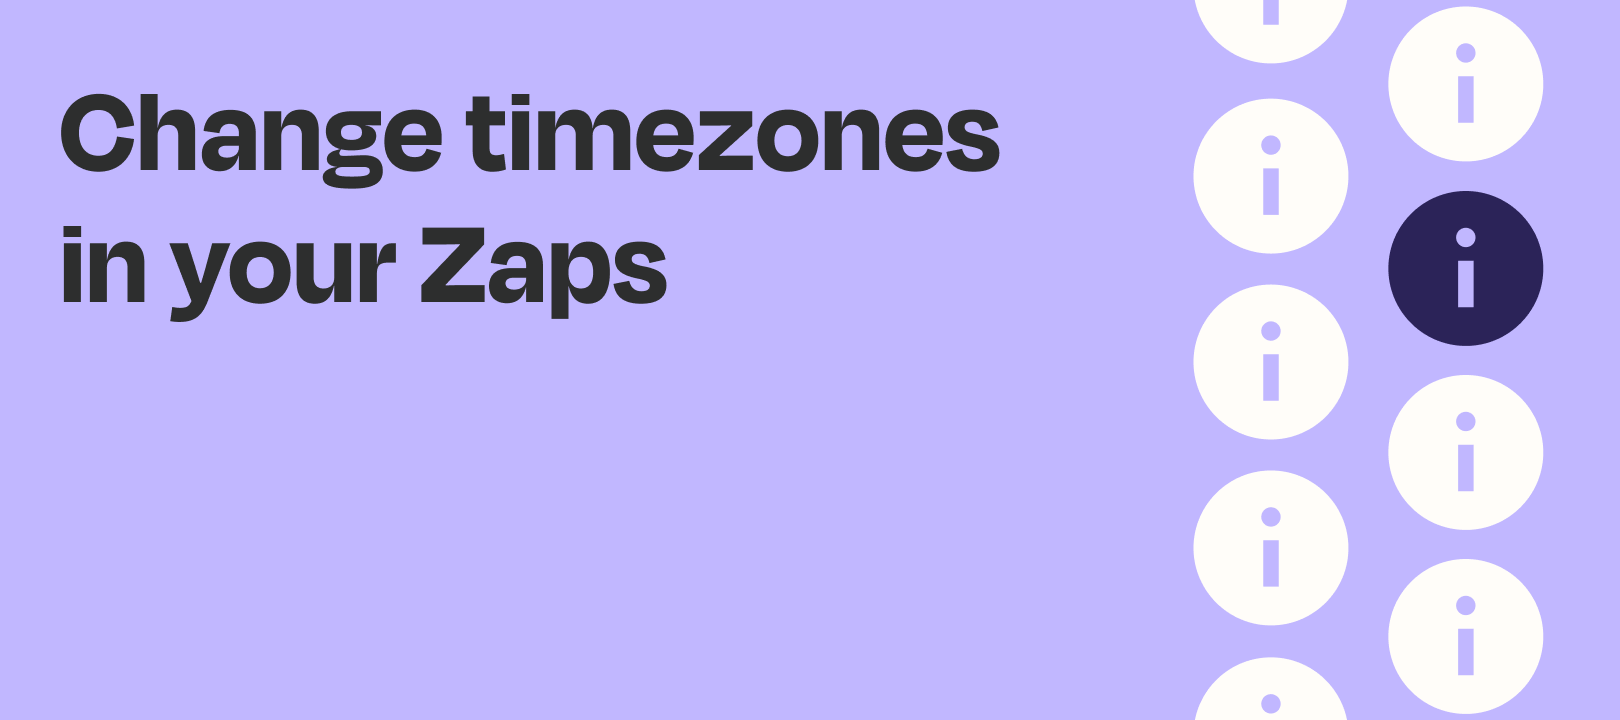 Zap timezones can now be changed!